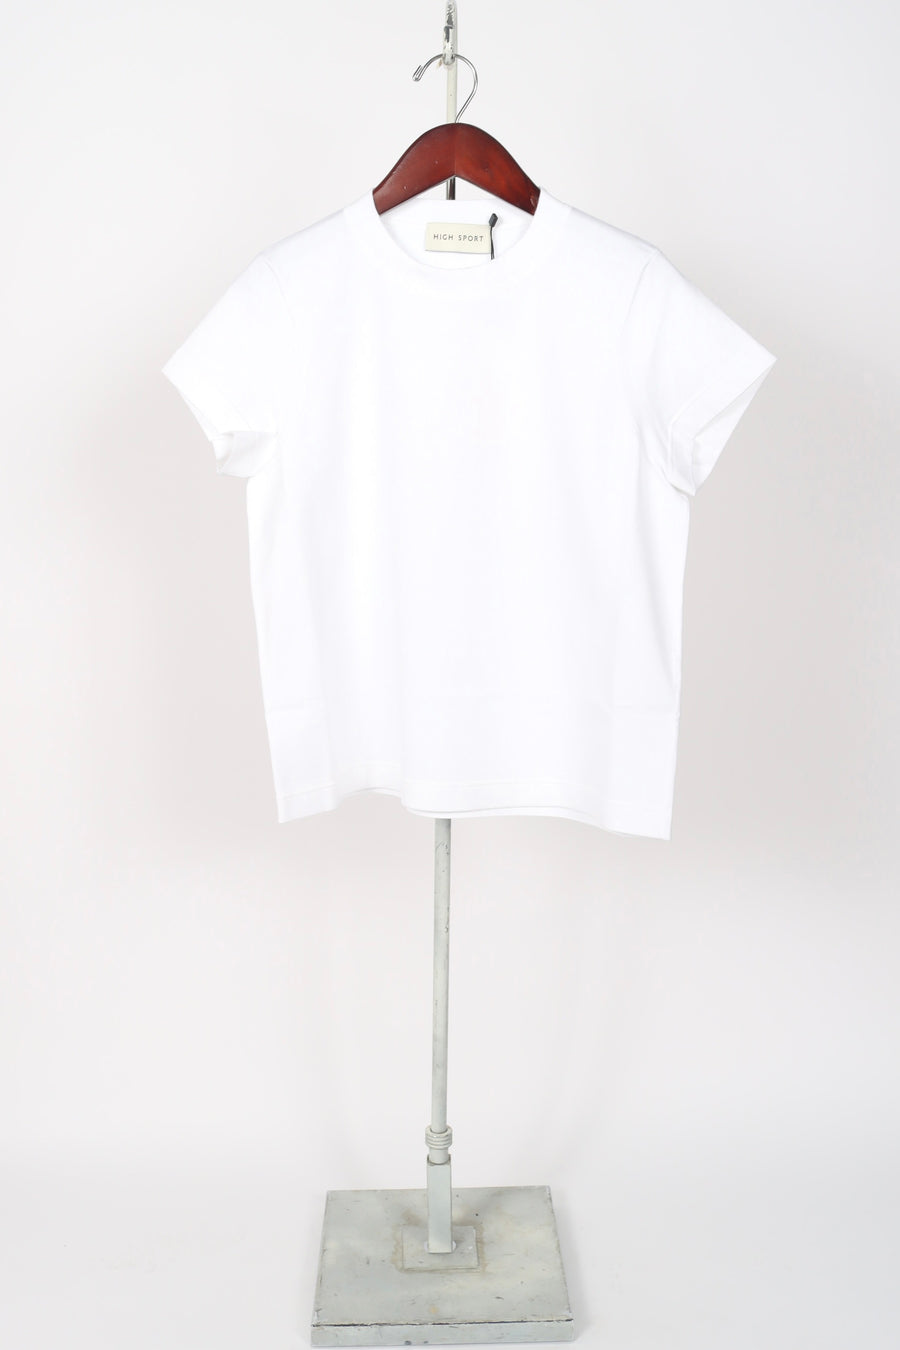 Raff Top - White (By Phone Order Only)